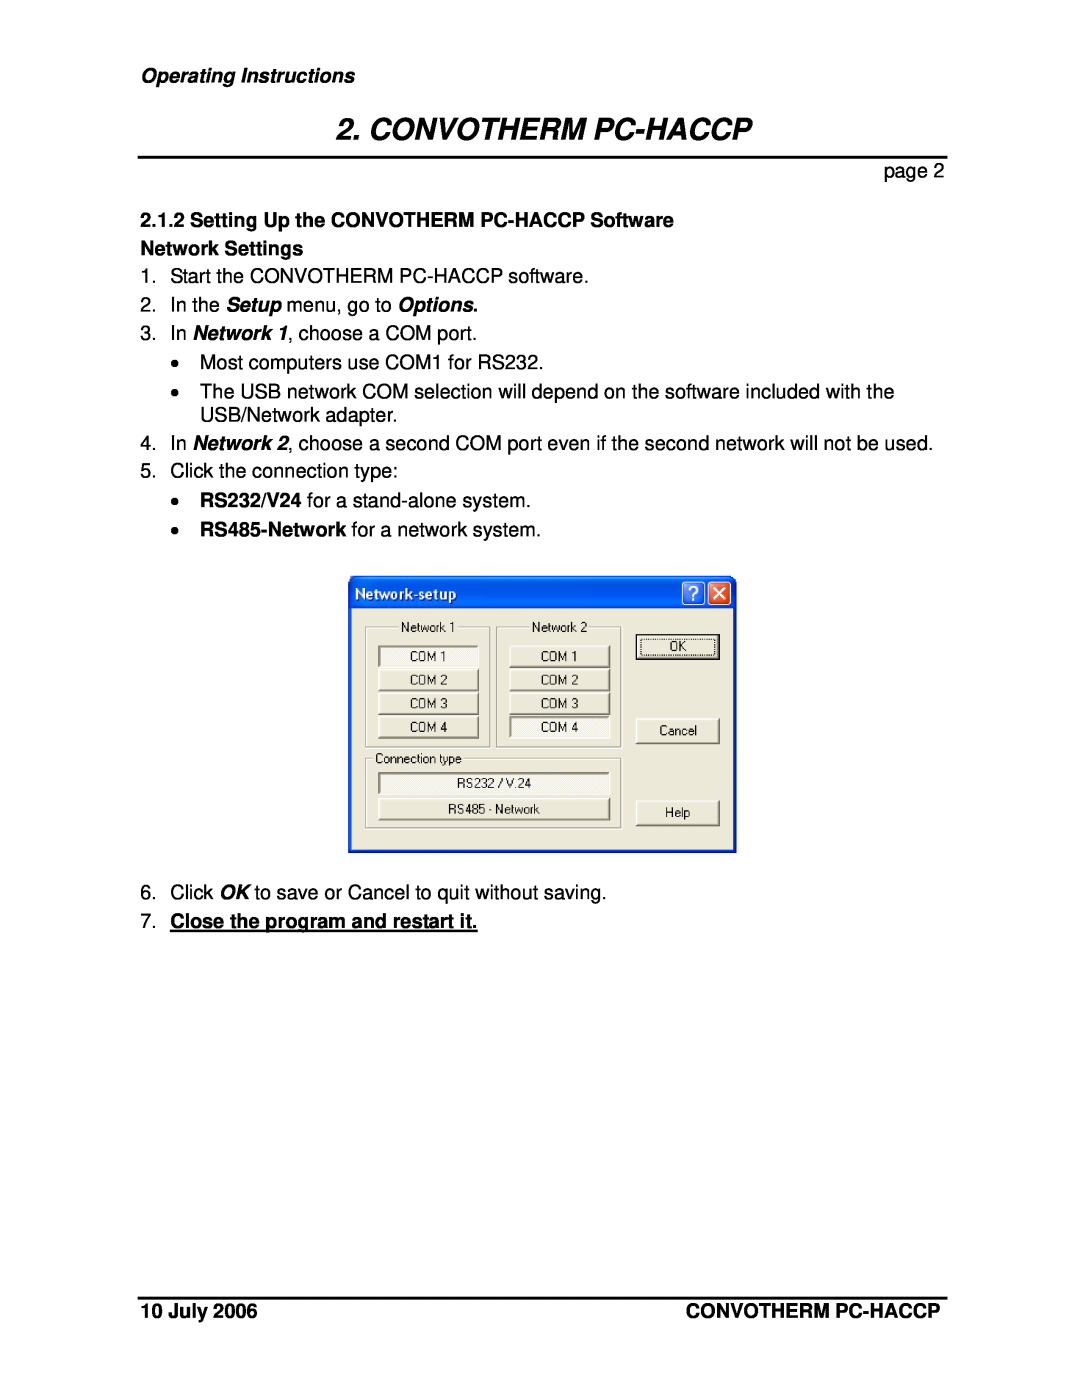 Cleveland Range Setting Up the CONVOTHERM PC-HACCP Software Network Settings, Close the program and restart it, July 